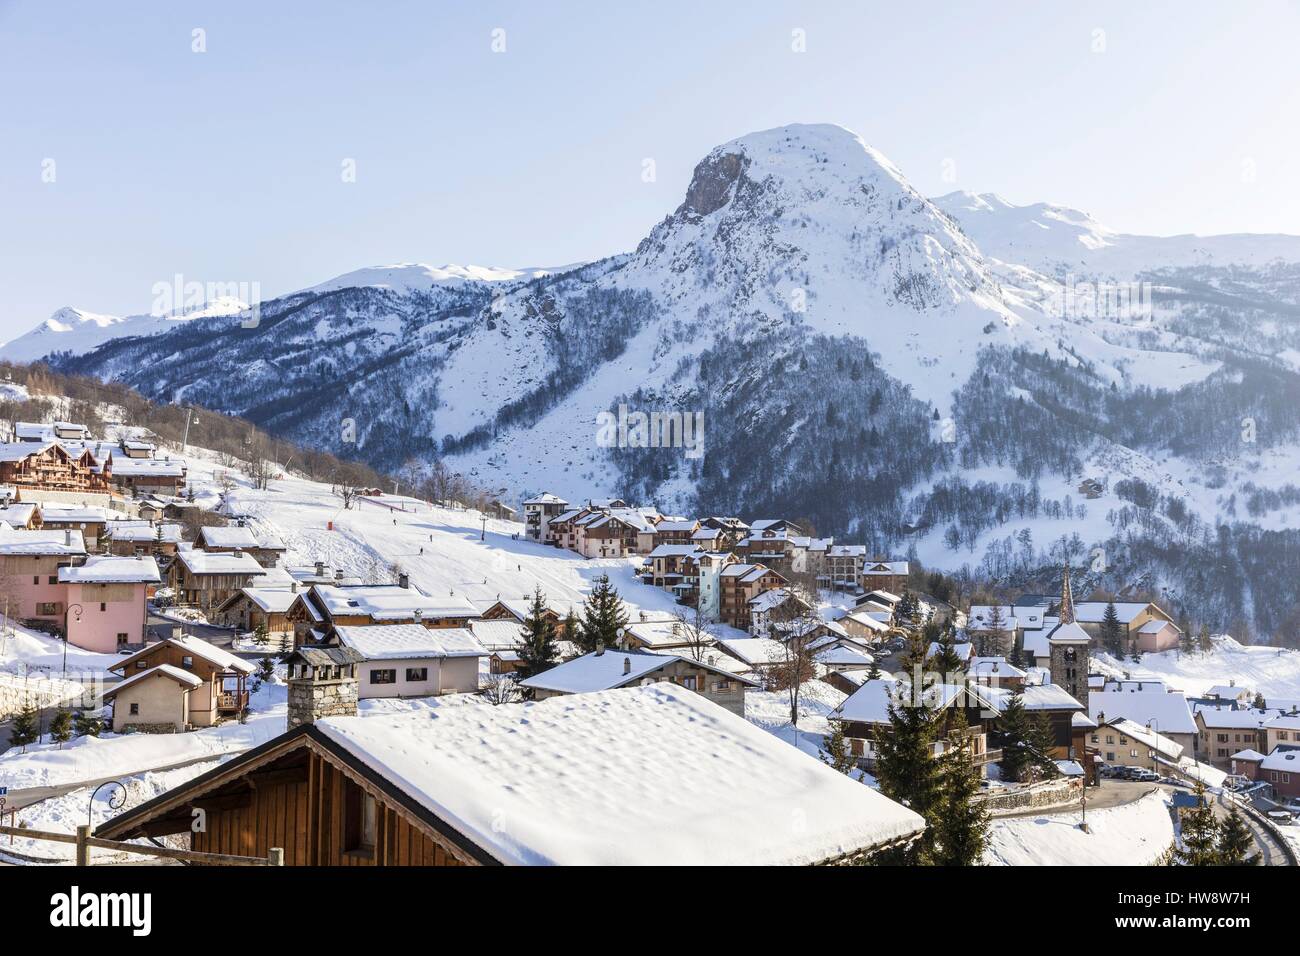 France, Savoie, Saint-Martin-de-Belleville, Des Bellevilles valley, Les Trois Vallees (The Three Valleys), the biggest ski area in the world with 600km of marked trails, view of Le Cochet (2098m) Stock Photo